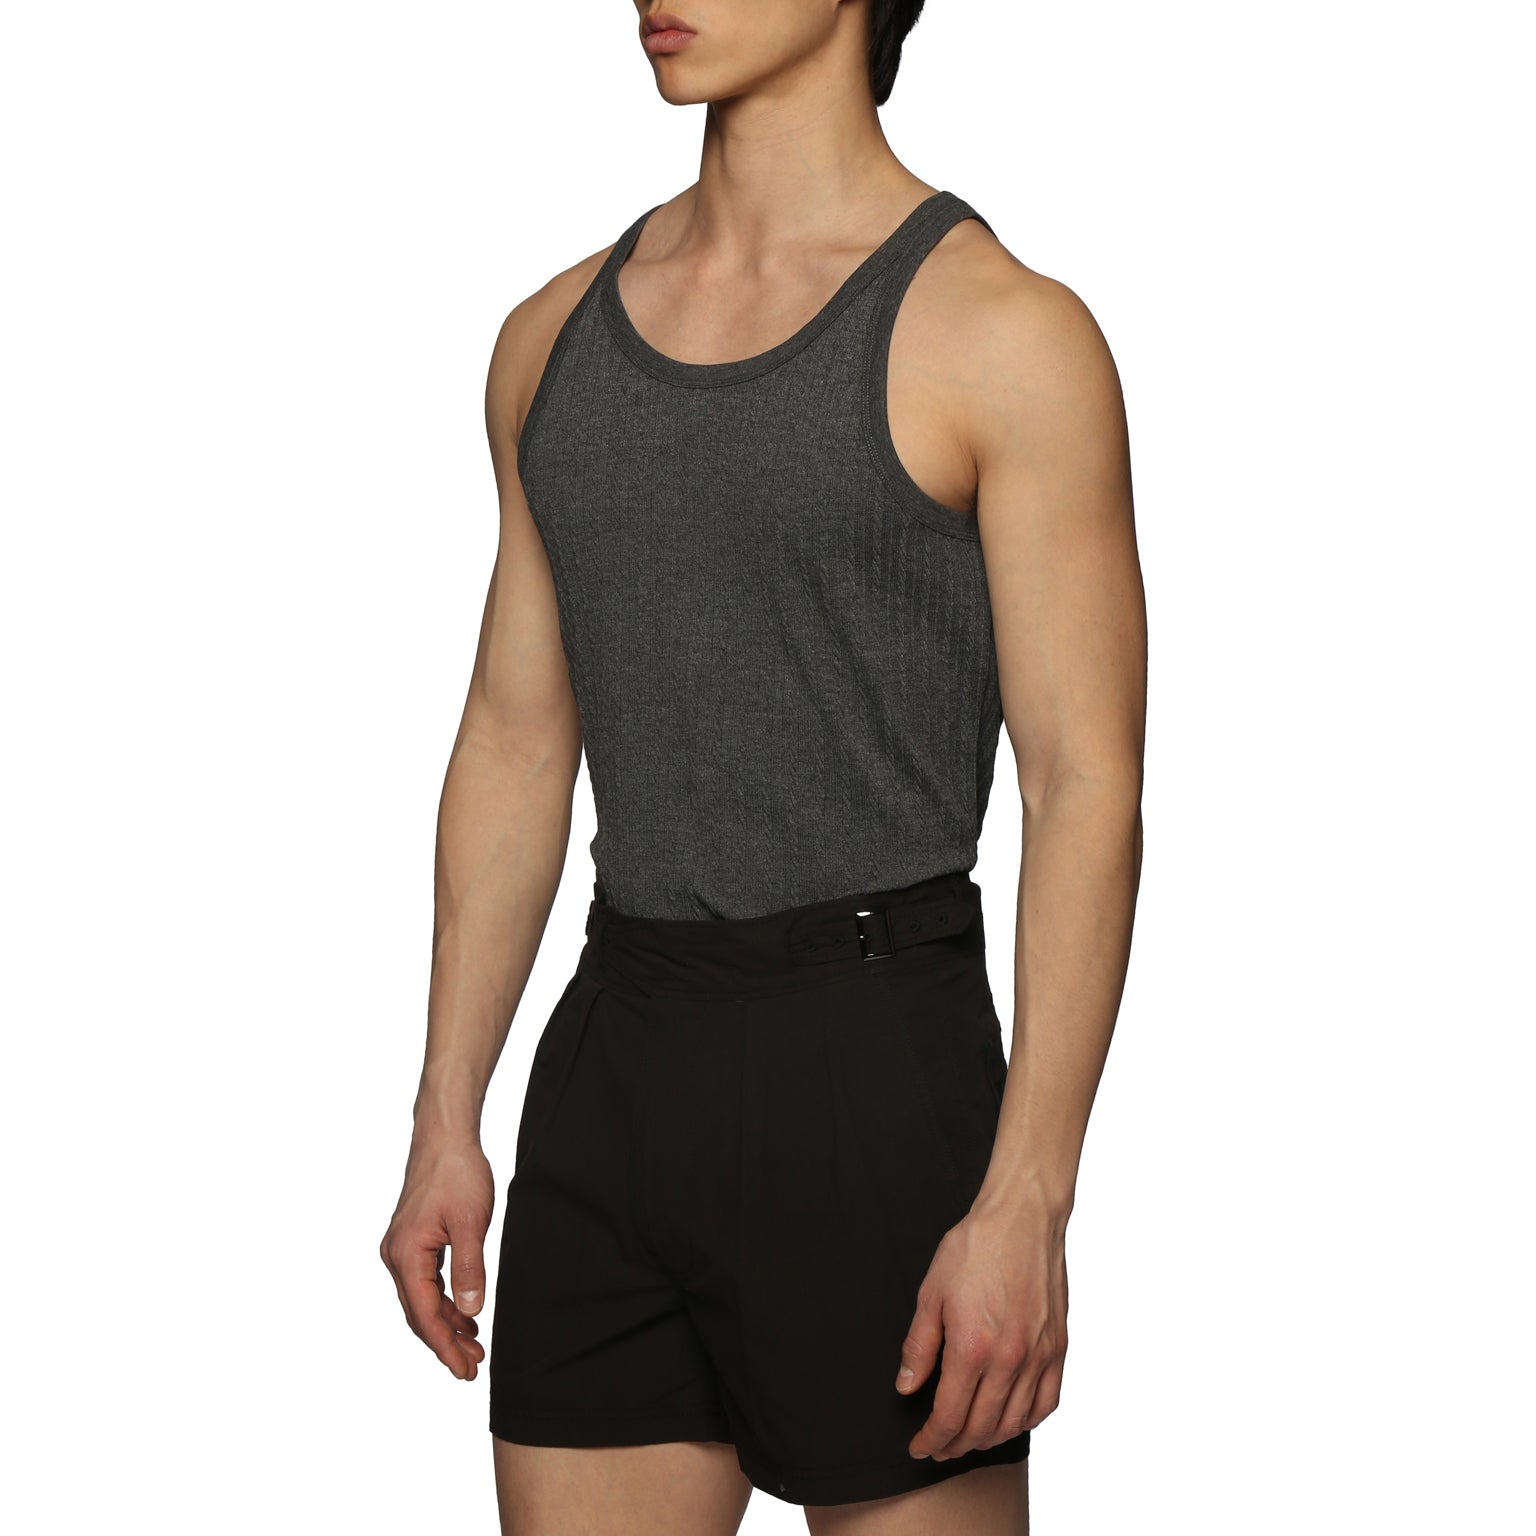 SPRING '24- Heather Charcoal Cable Knit Firenze Tank